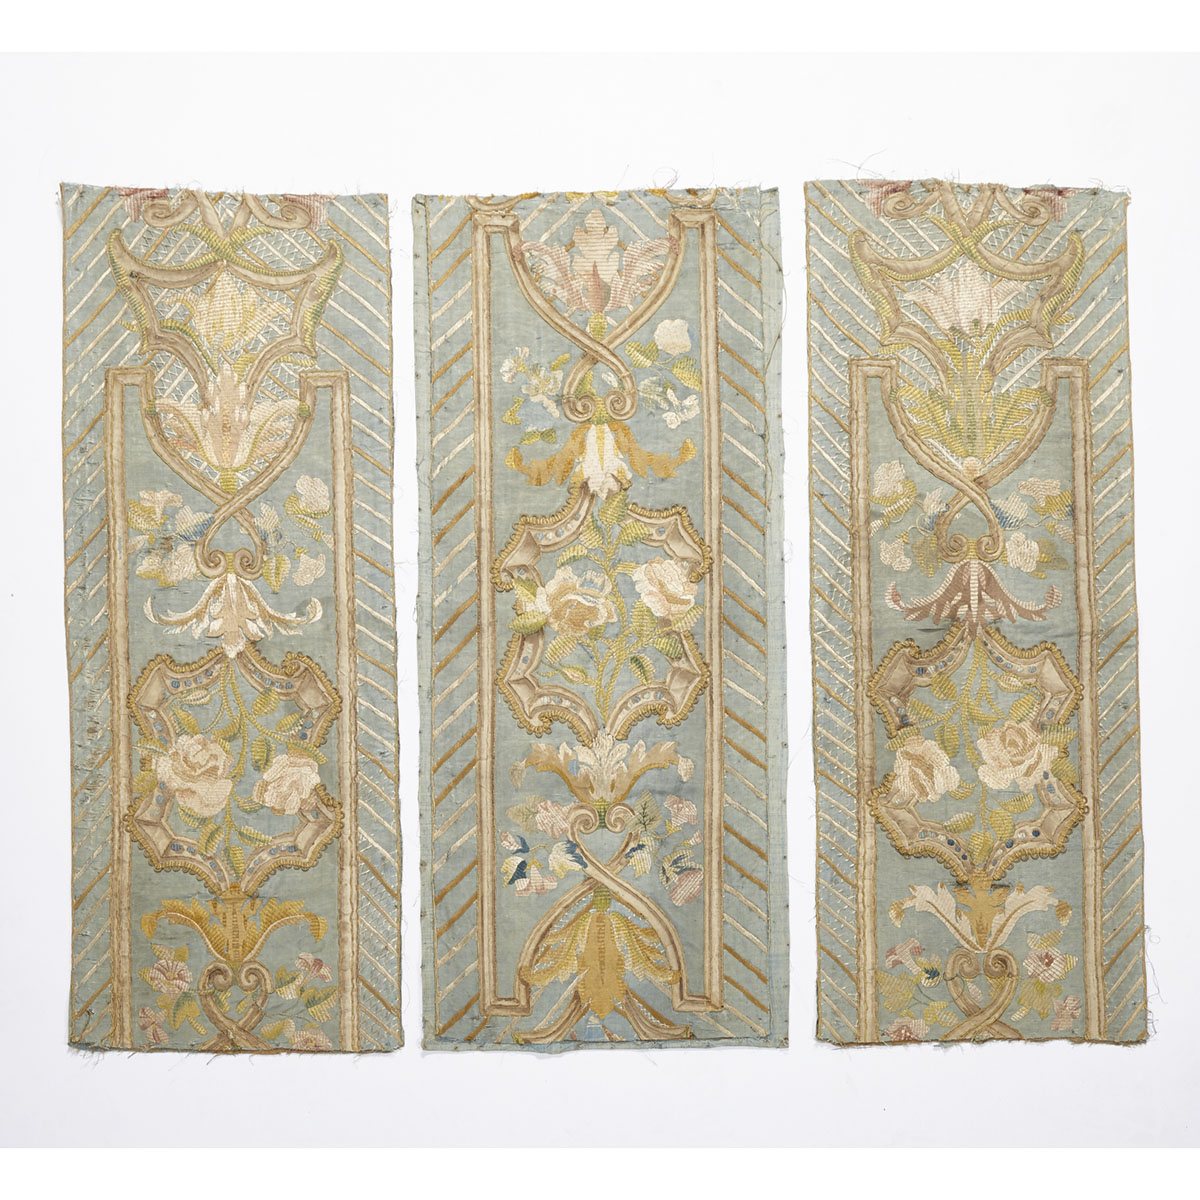 Three French Embroidered and Appliqué Silk Panels, late 18th/early 19th century